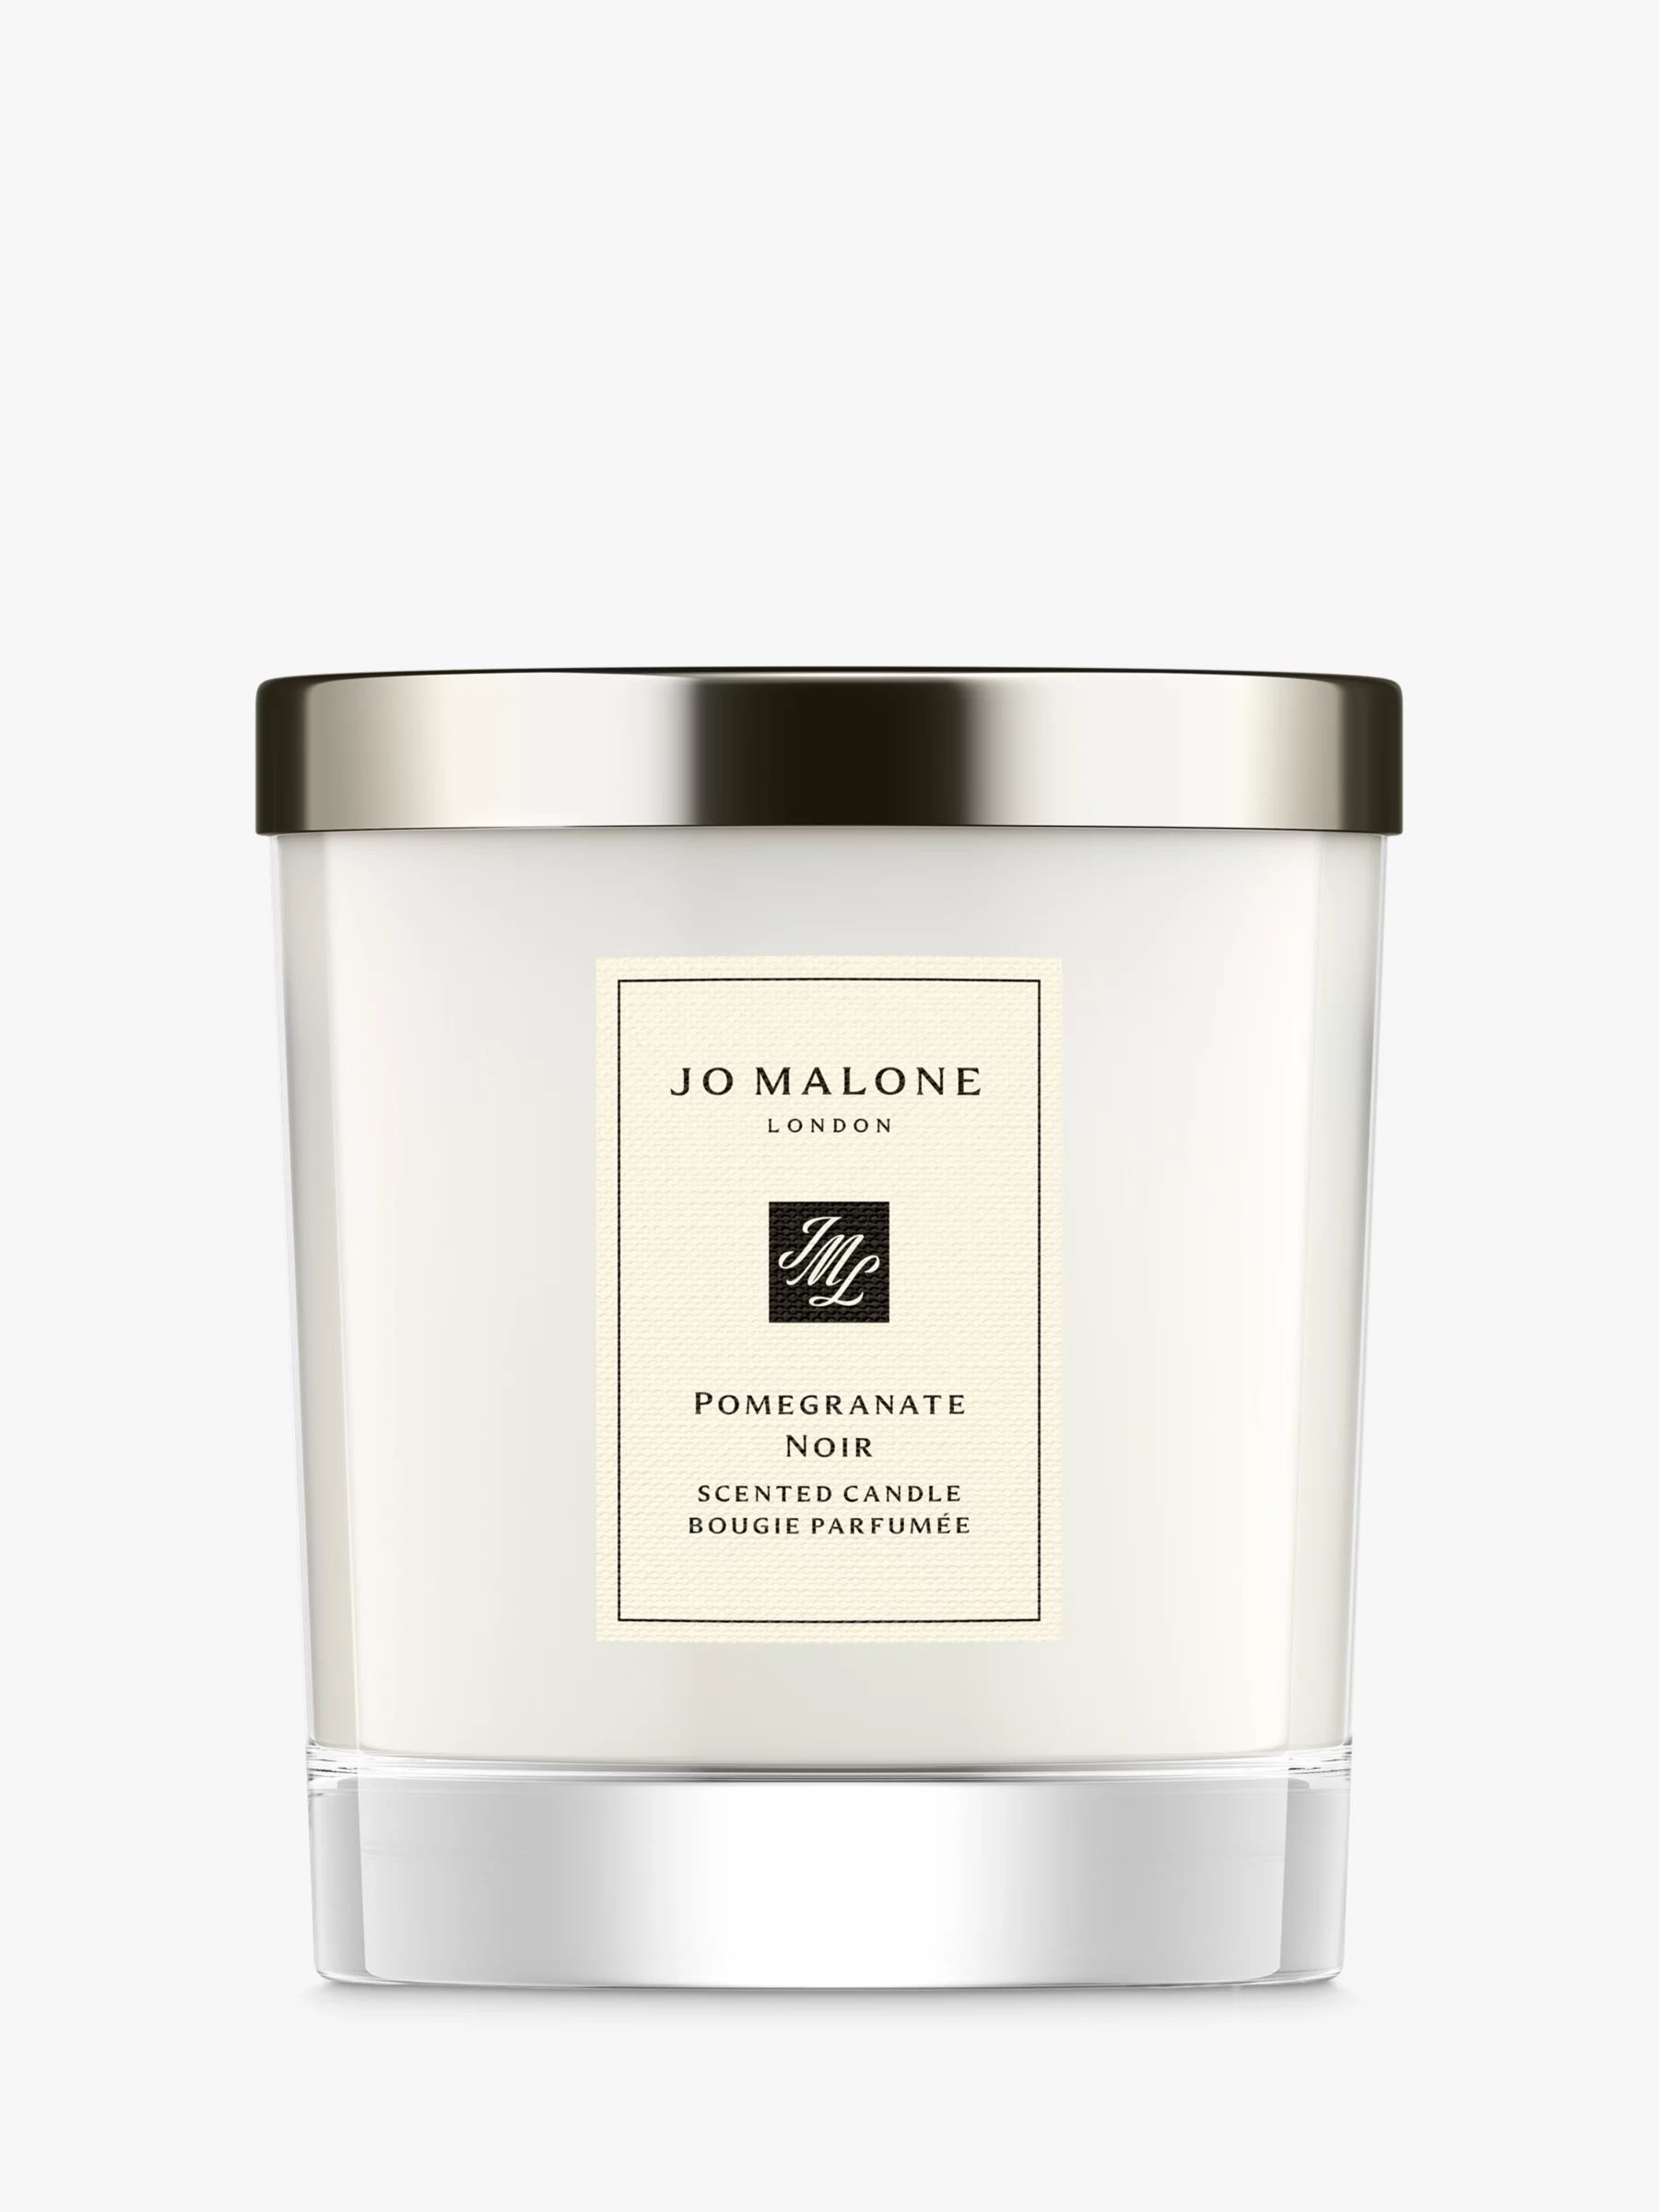 Jo Malone London Pomegranate Noir Home Scented Candle, 200g | John Lewis (UK)